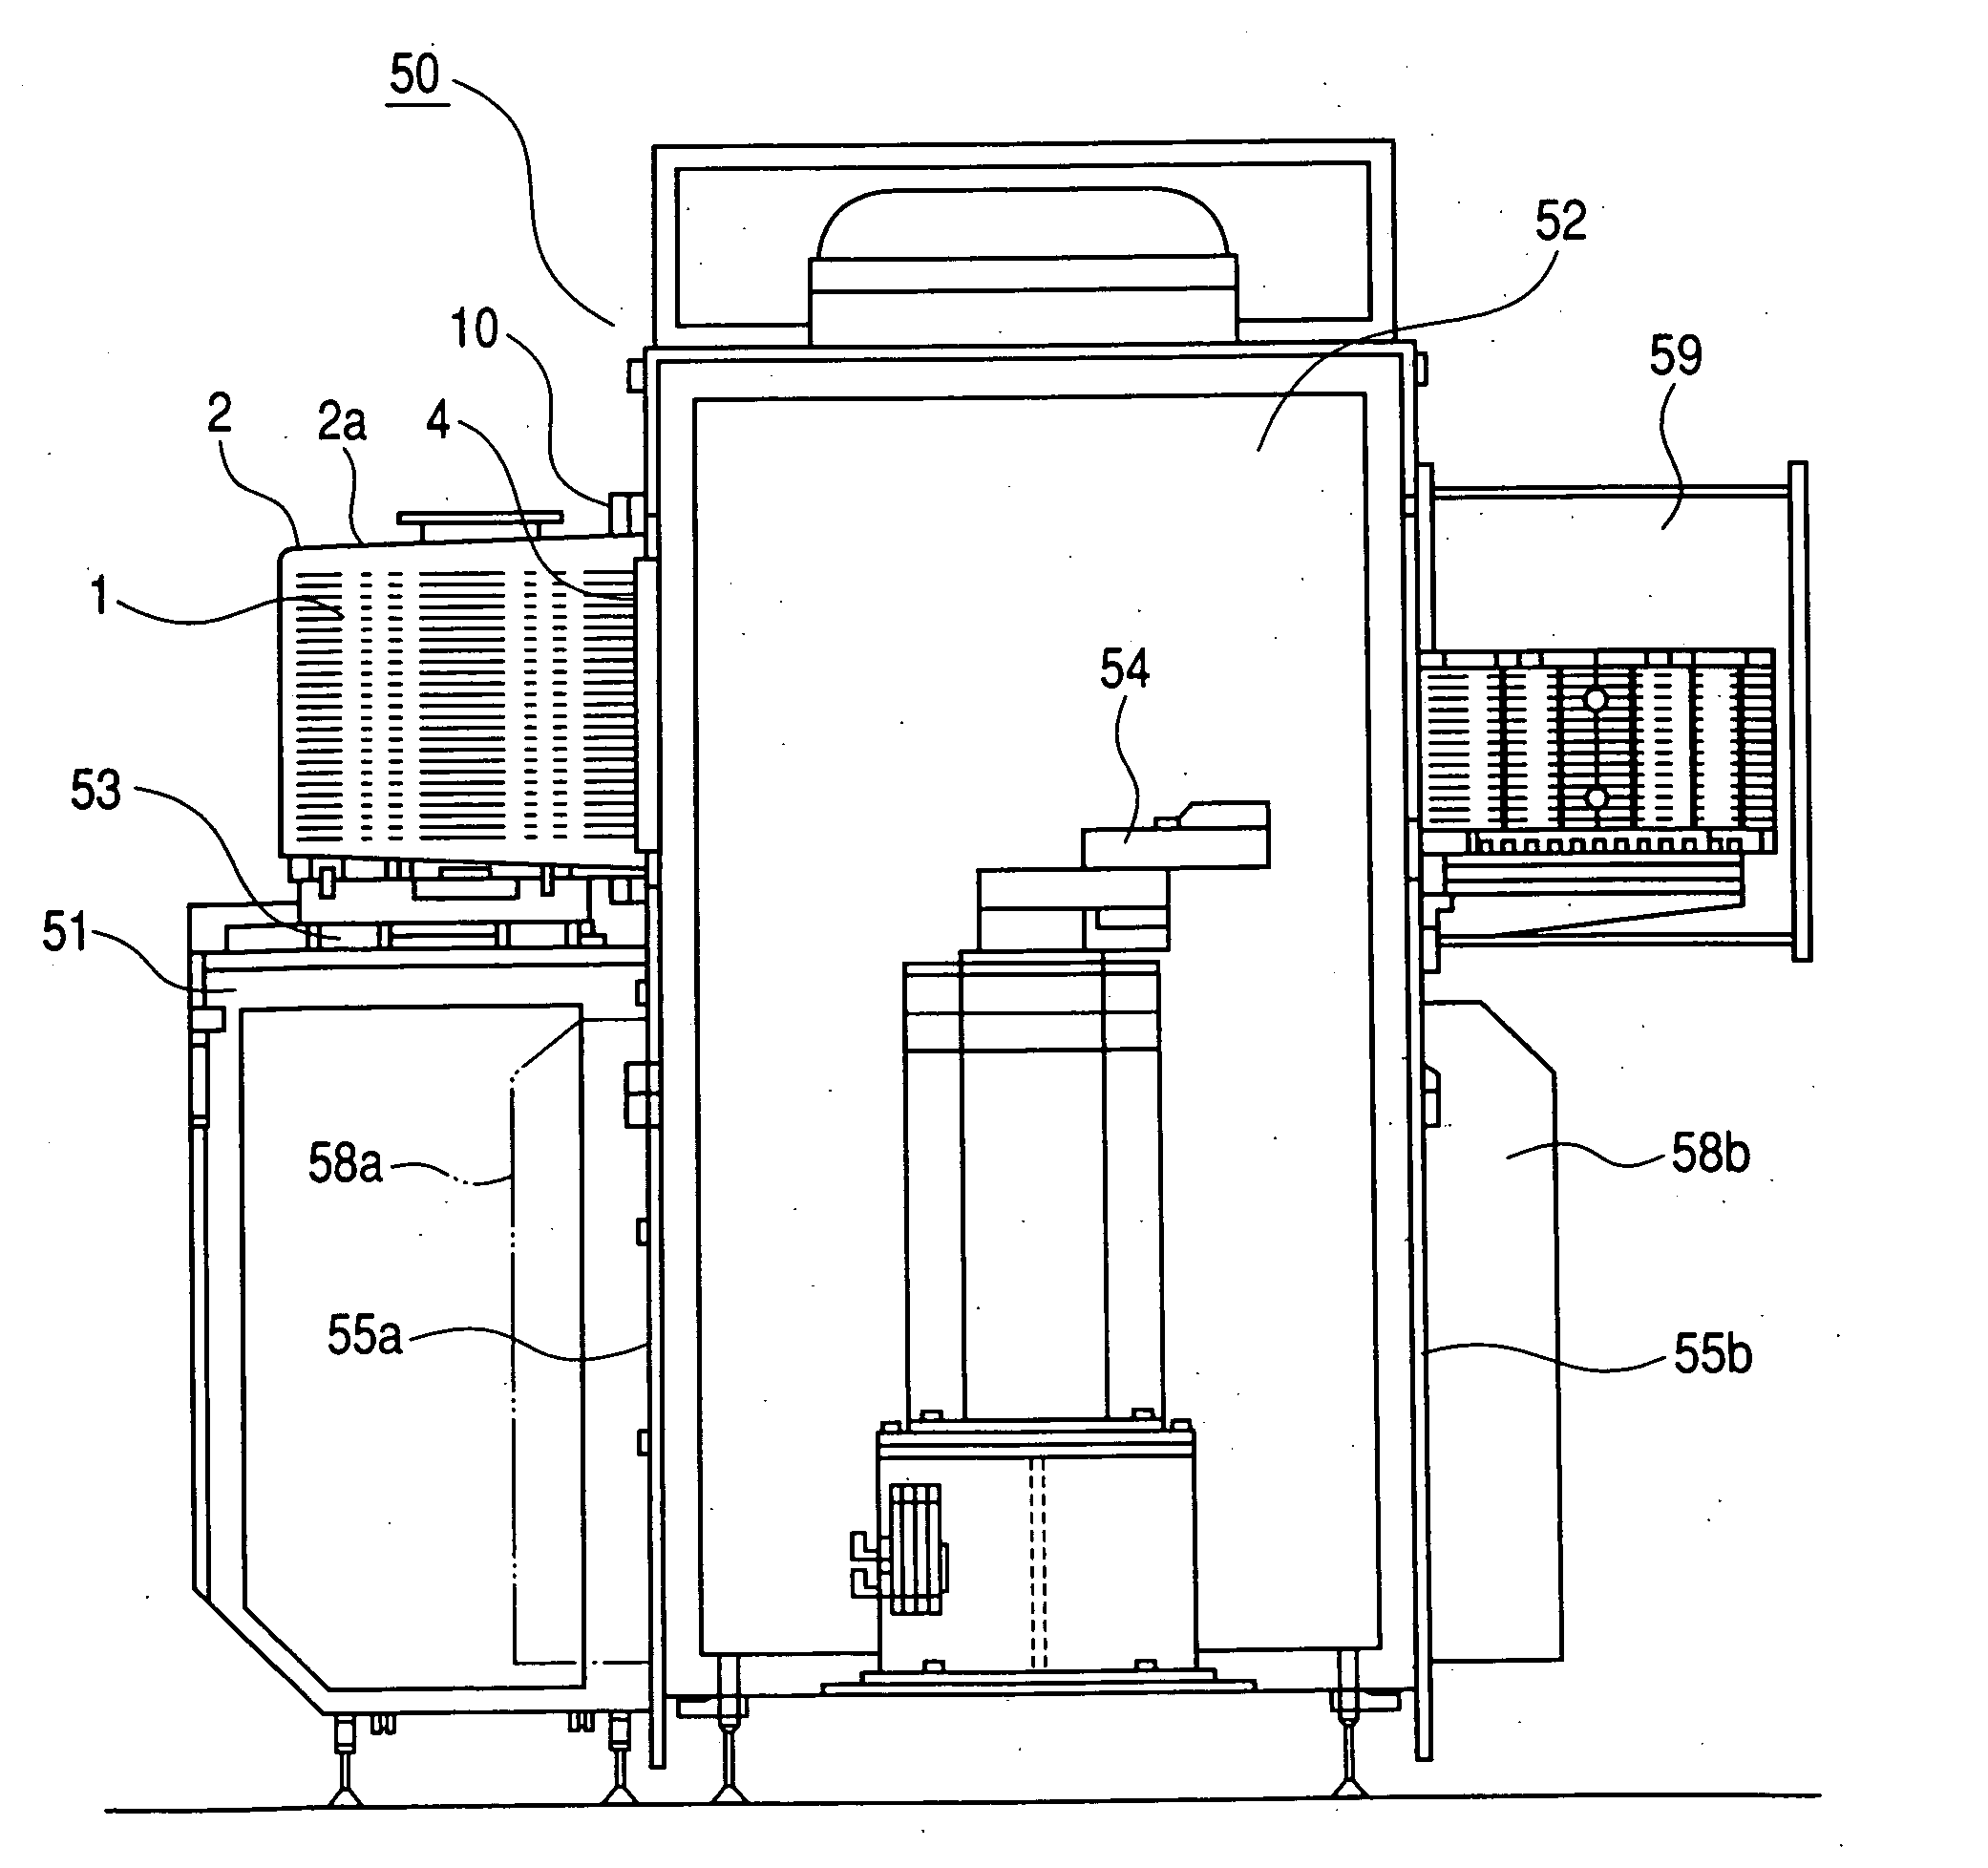 Enclosed container lid opening/closing system and enclosed container lid opening/closing method